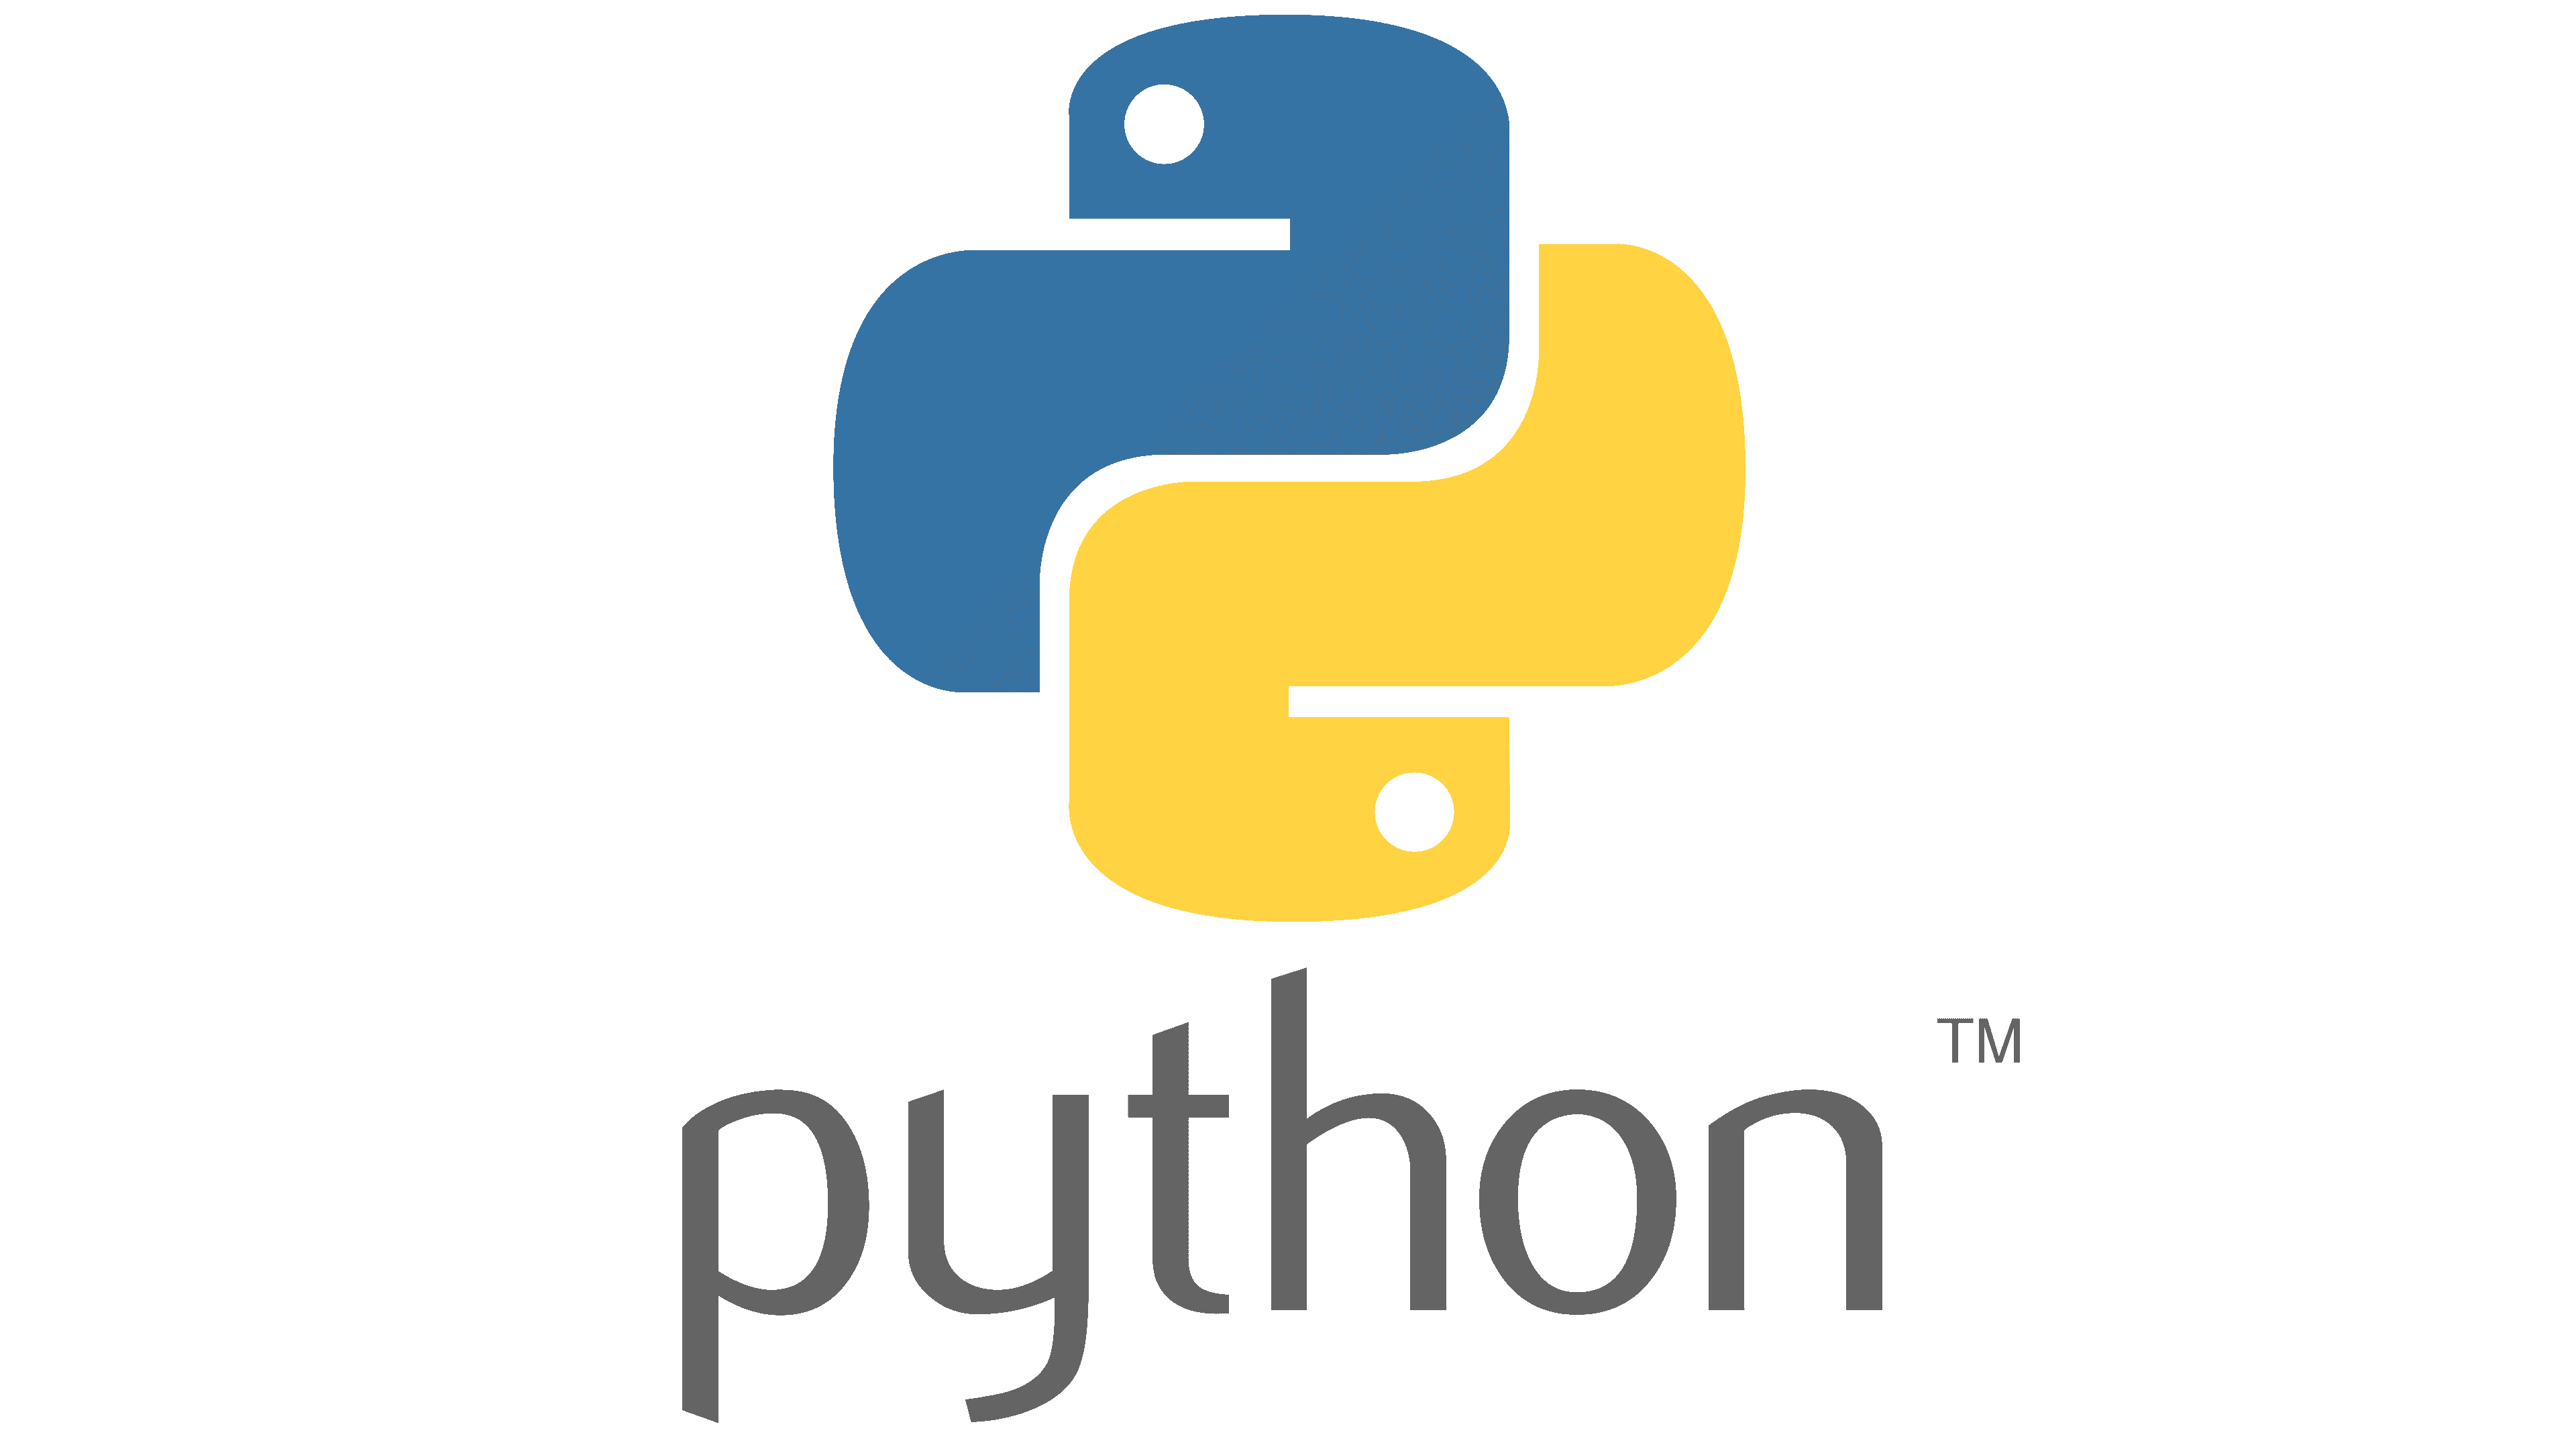 Python logo: the words Python under a blue and yellow symbol